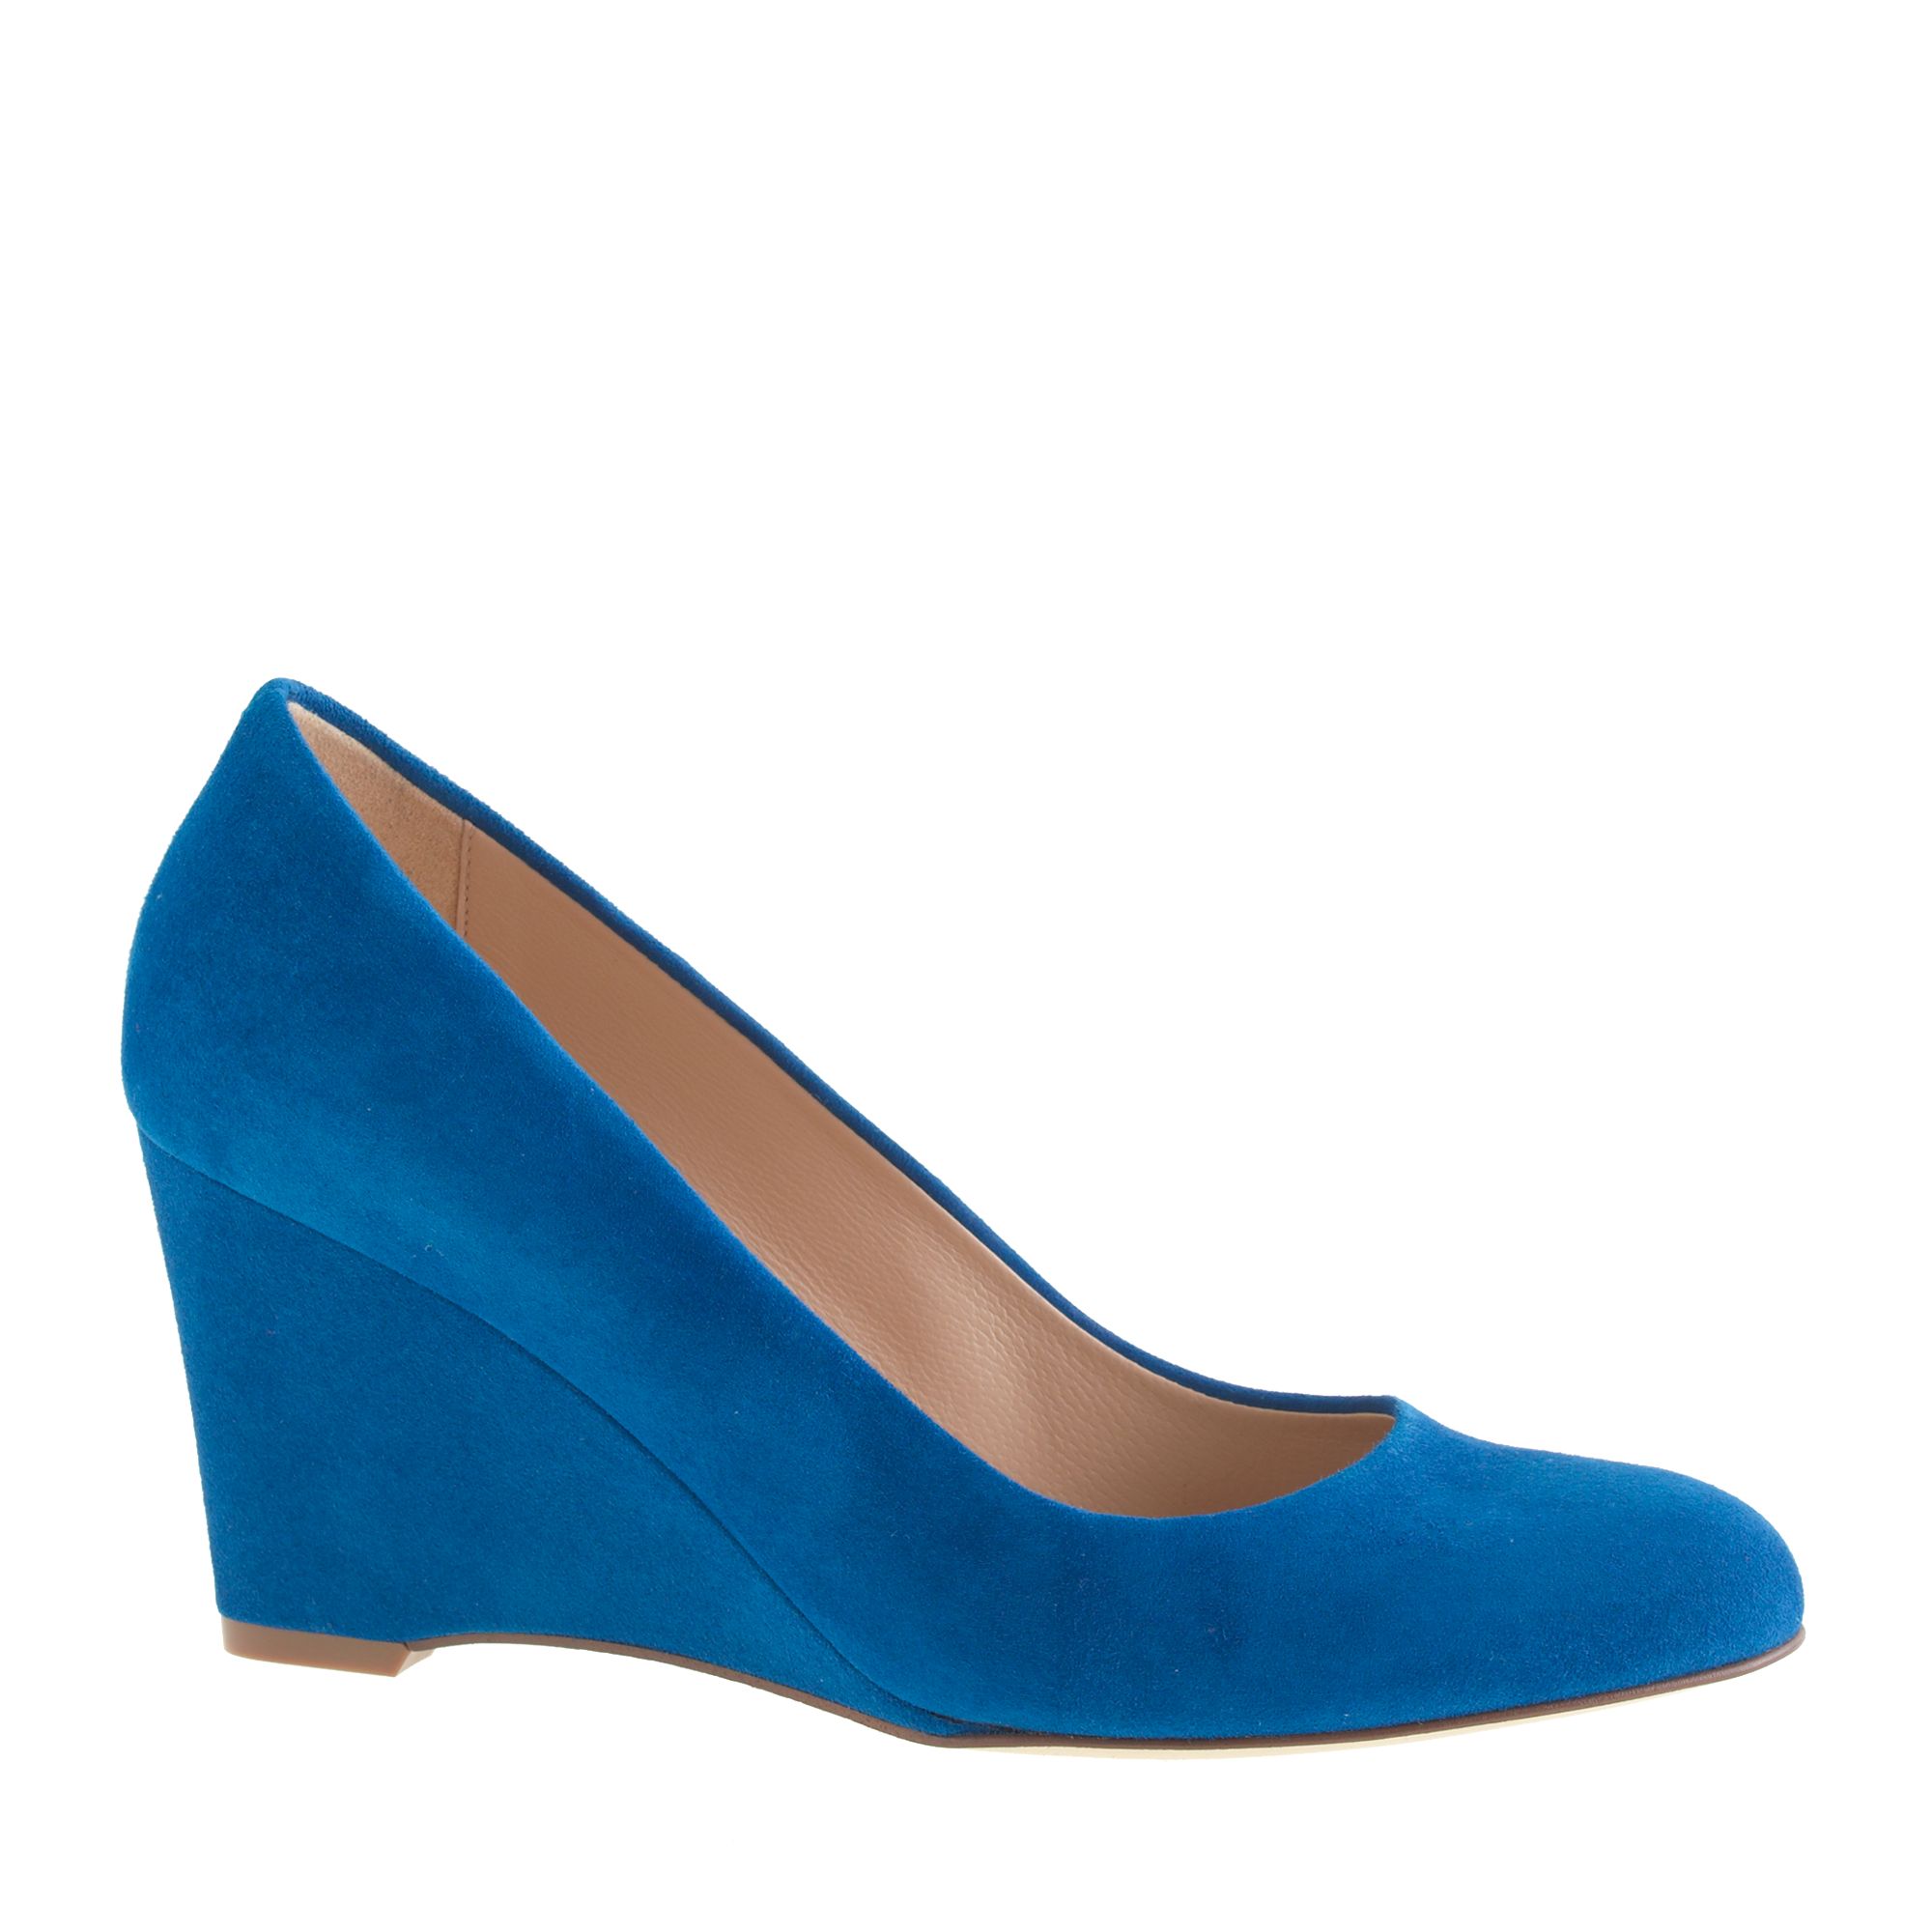 J.Crew Suede Wedges in Blue - Lyst